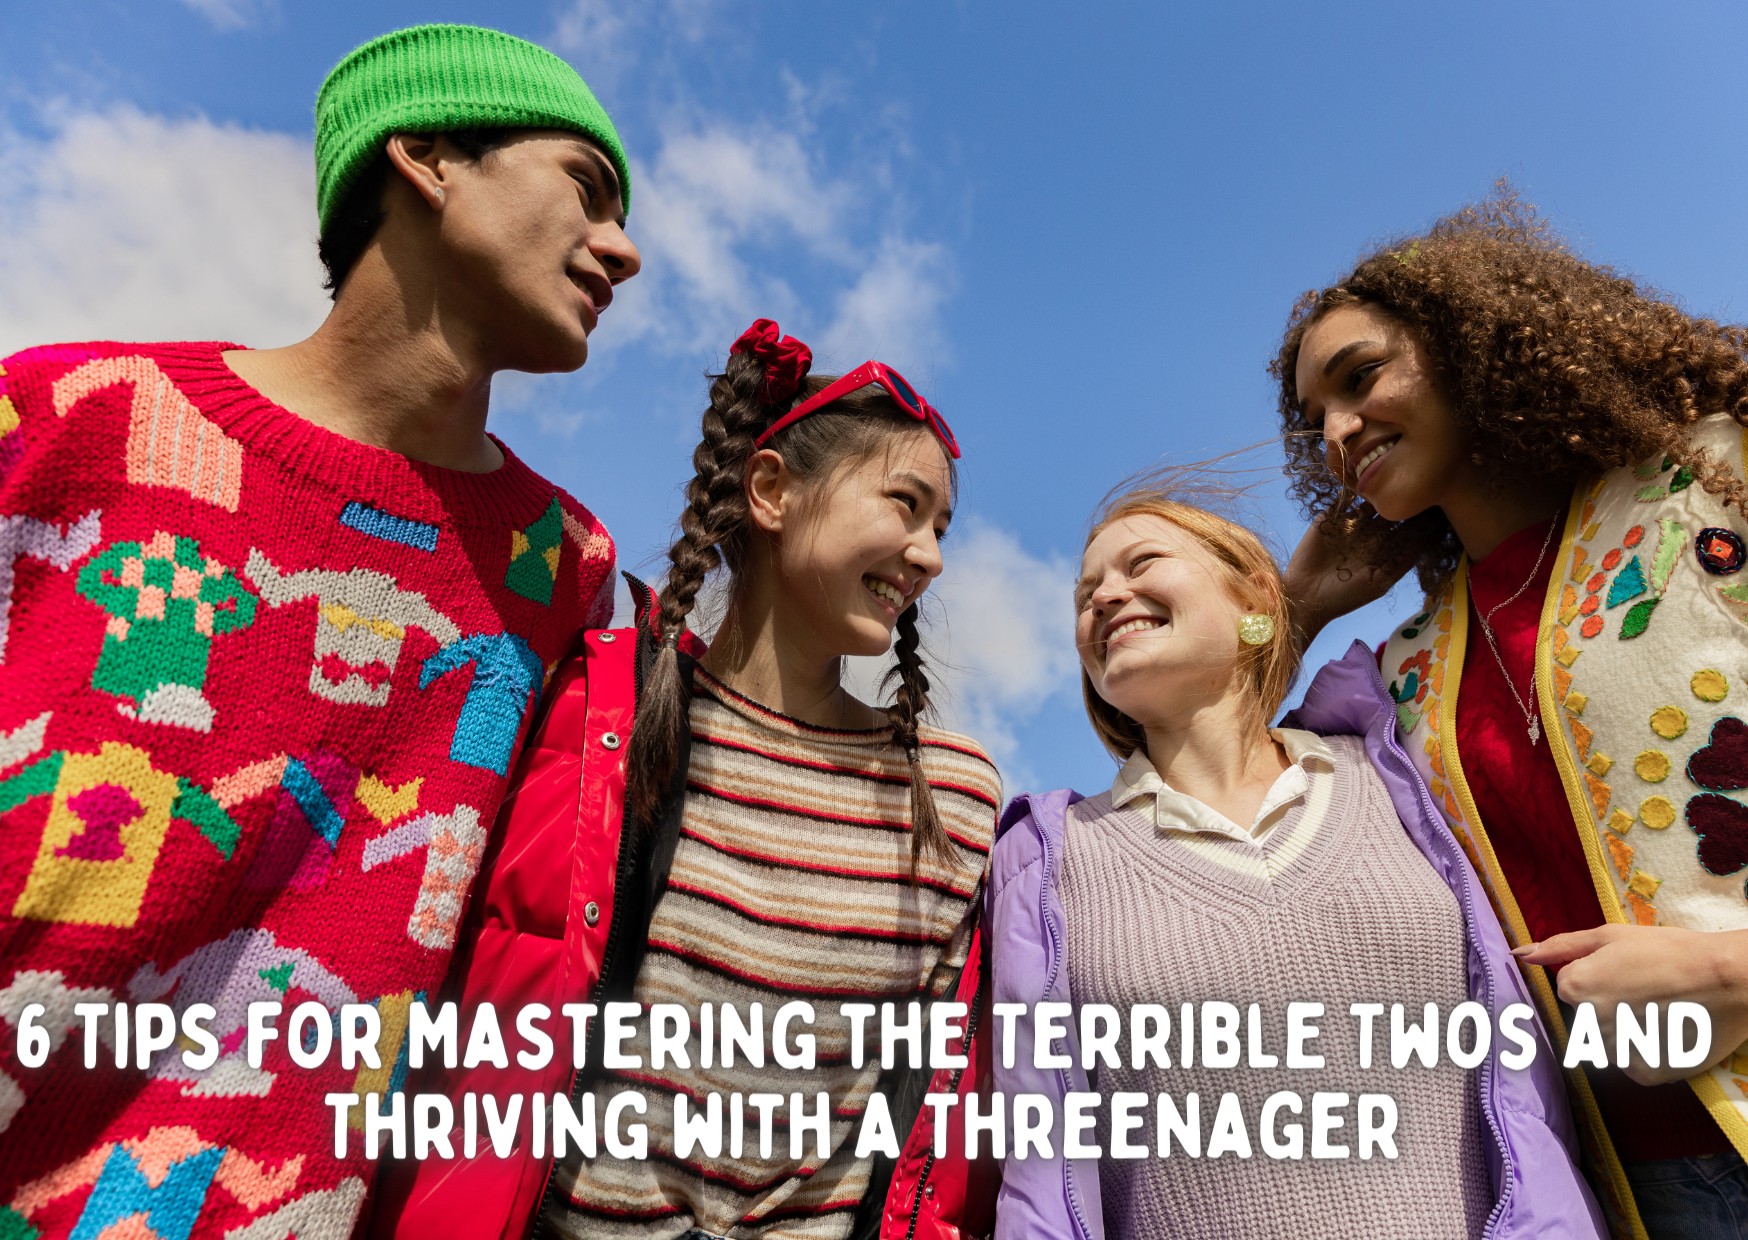 6 Tips for Mastering the Terrible Twos and Thriving with a Threenager